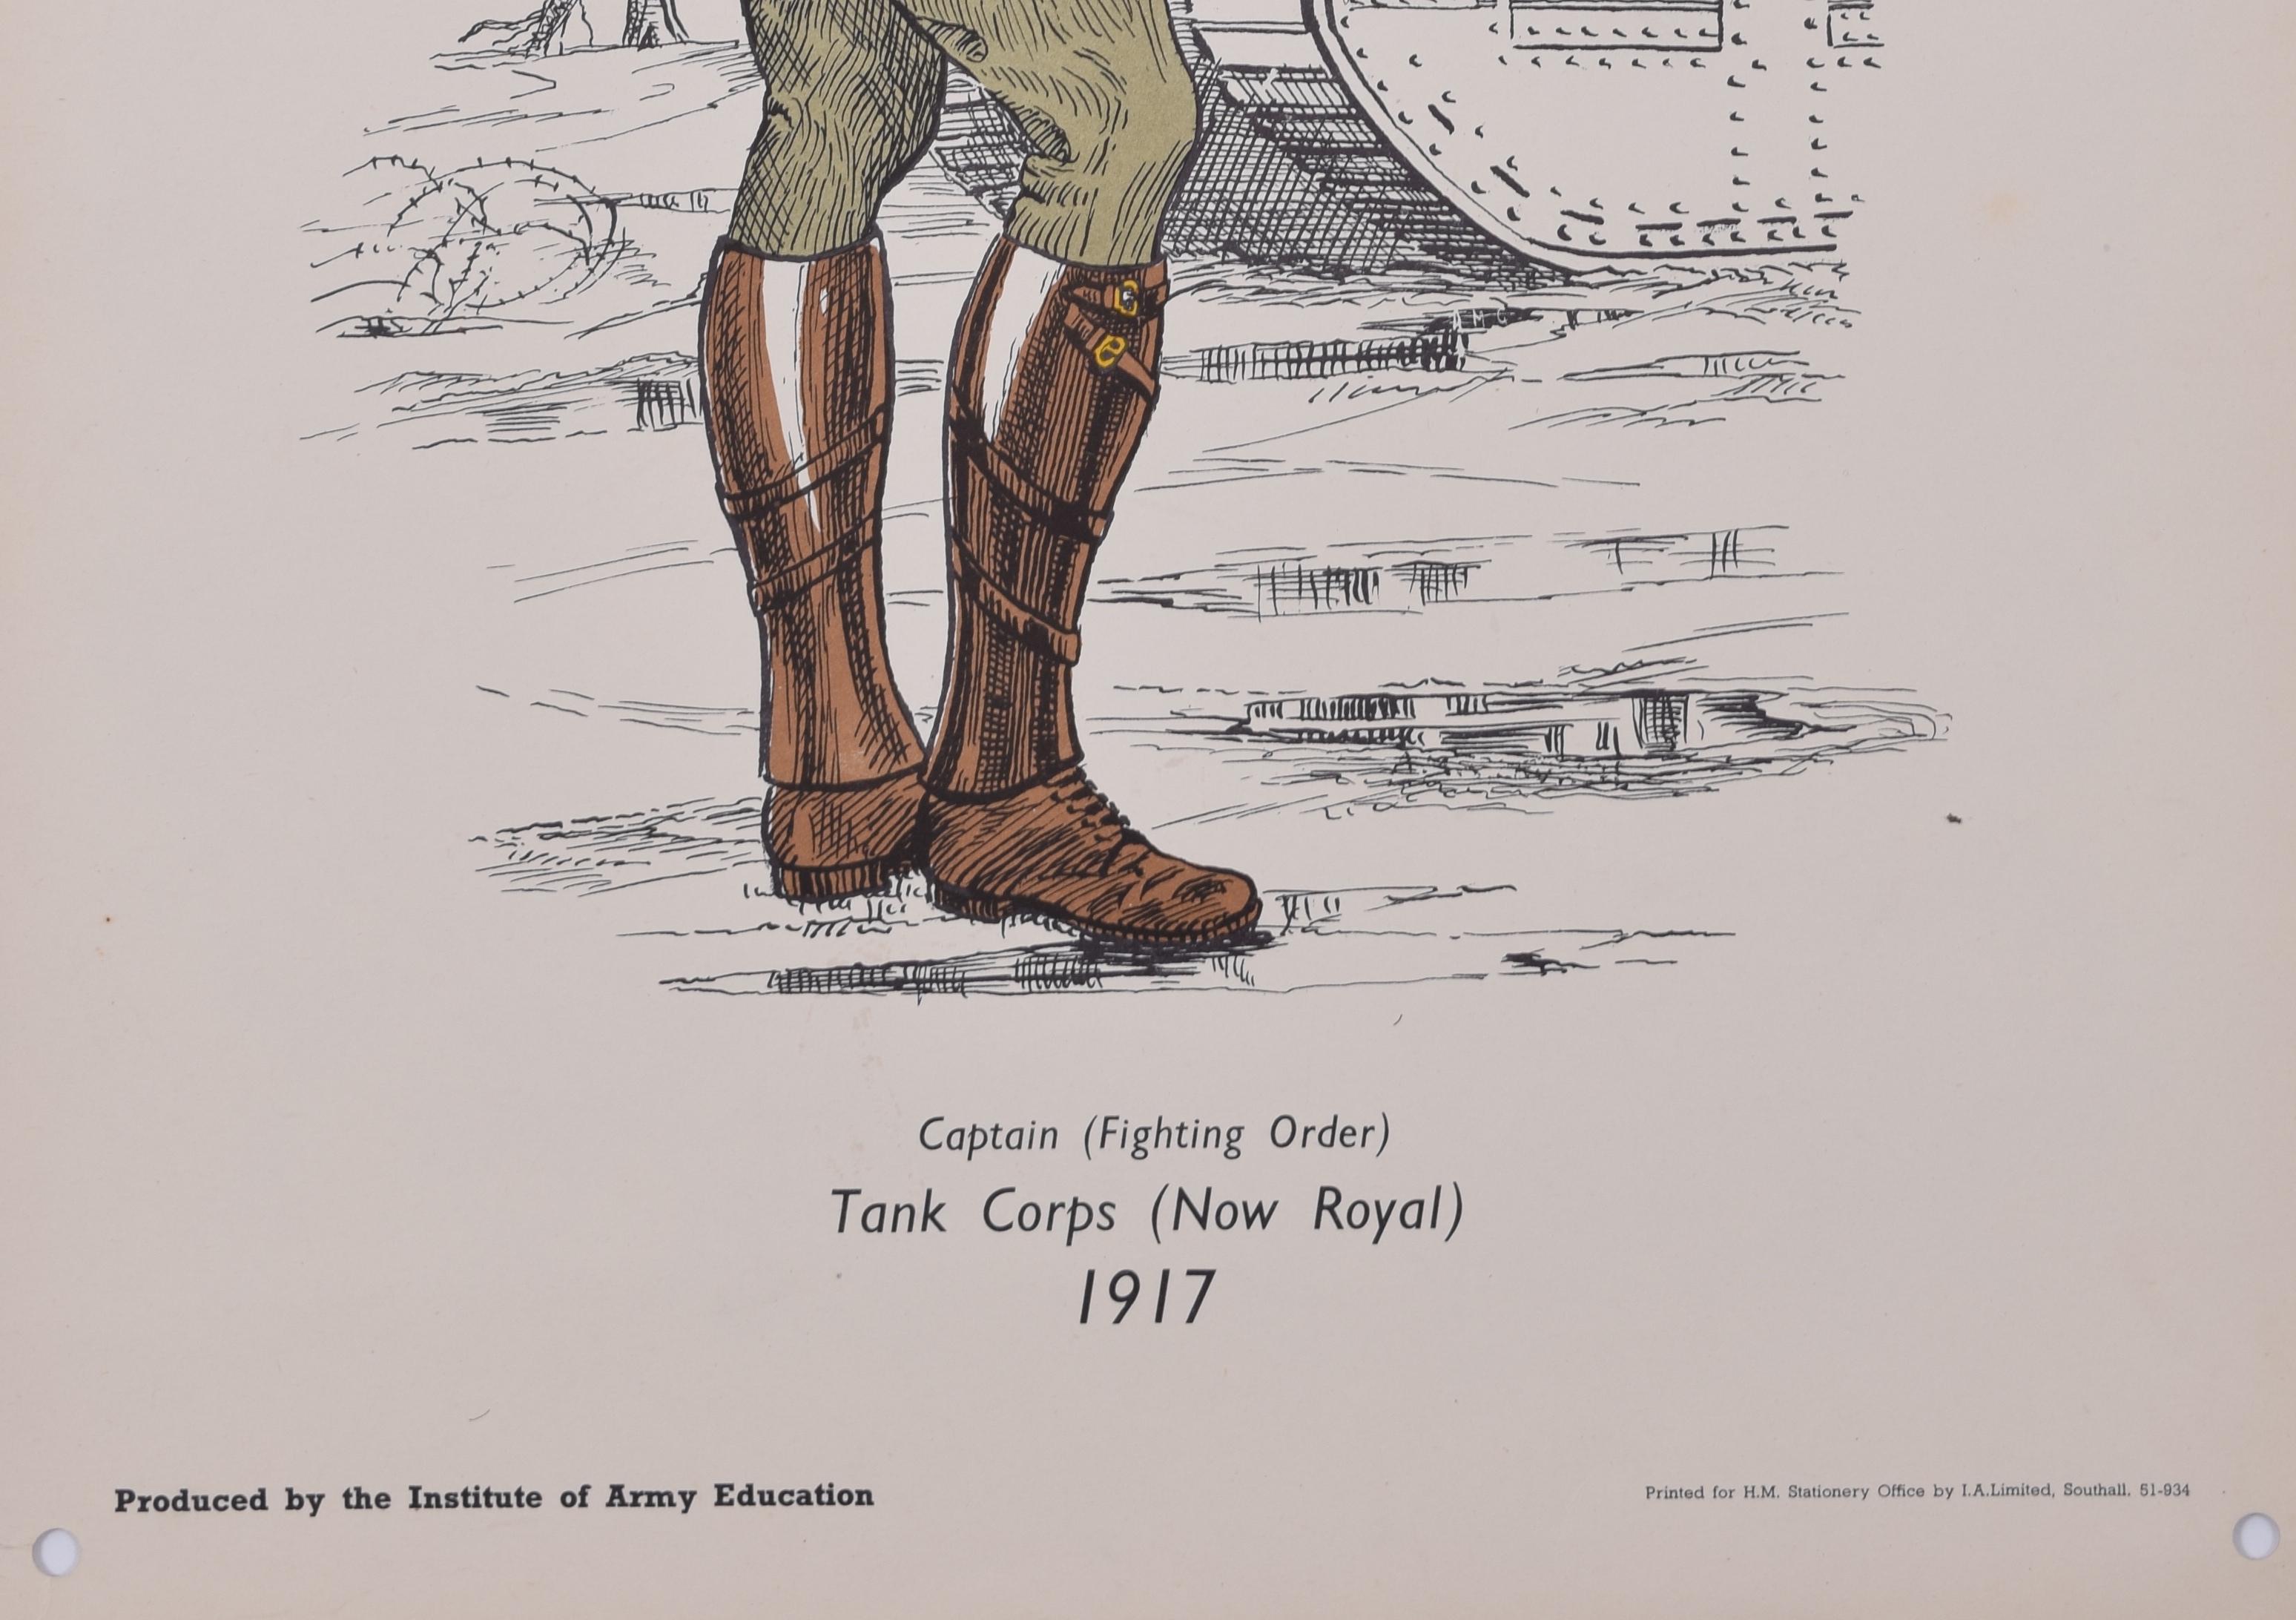 Tank Corps (now Royal) Captain (Fighting Order) 1917 uniform
Lithograph
50 x 31 cm

Produced for the Institute of Army Education. Printed for HM Stationery Office by I A Limited, Southall 51.

These posters were produced by the Institute of Army